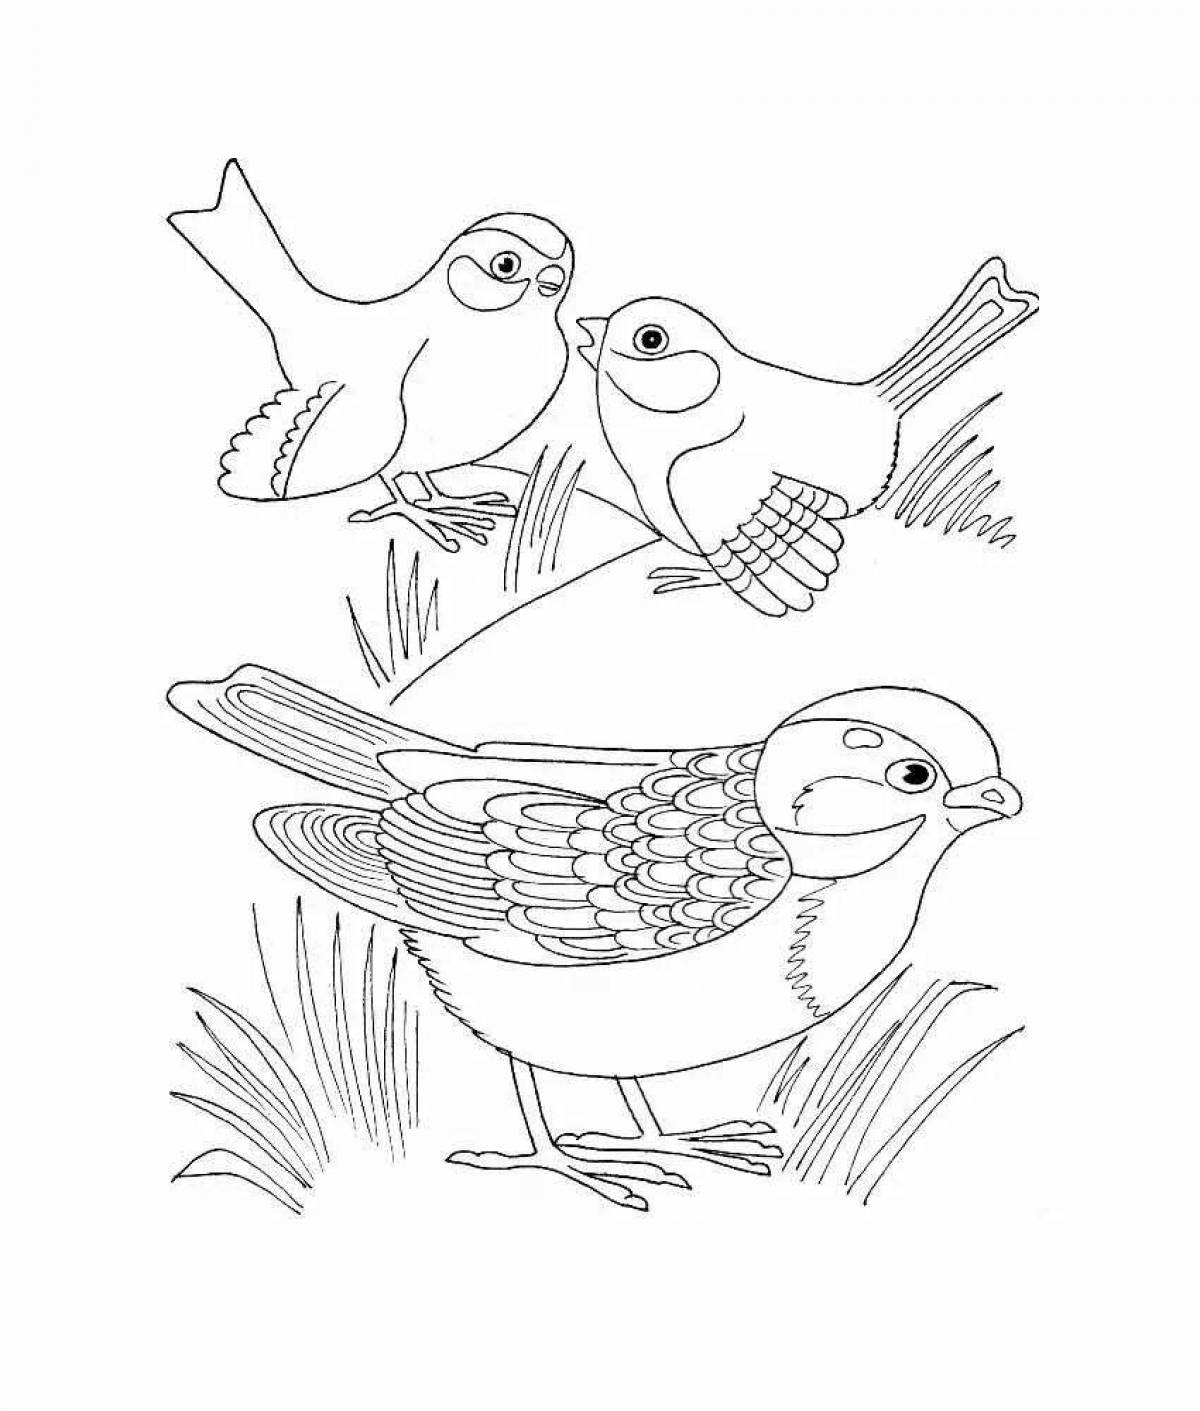 A fascinating sparrow coloring book for children 6-7 years old